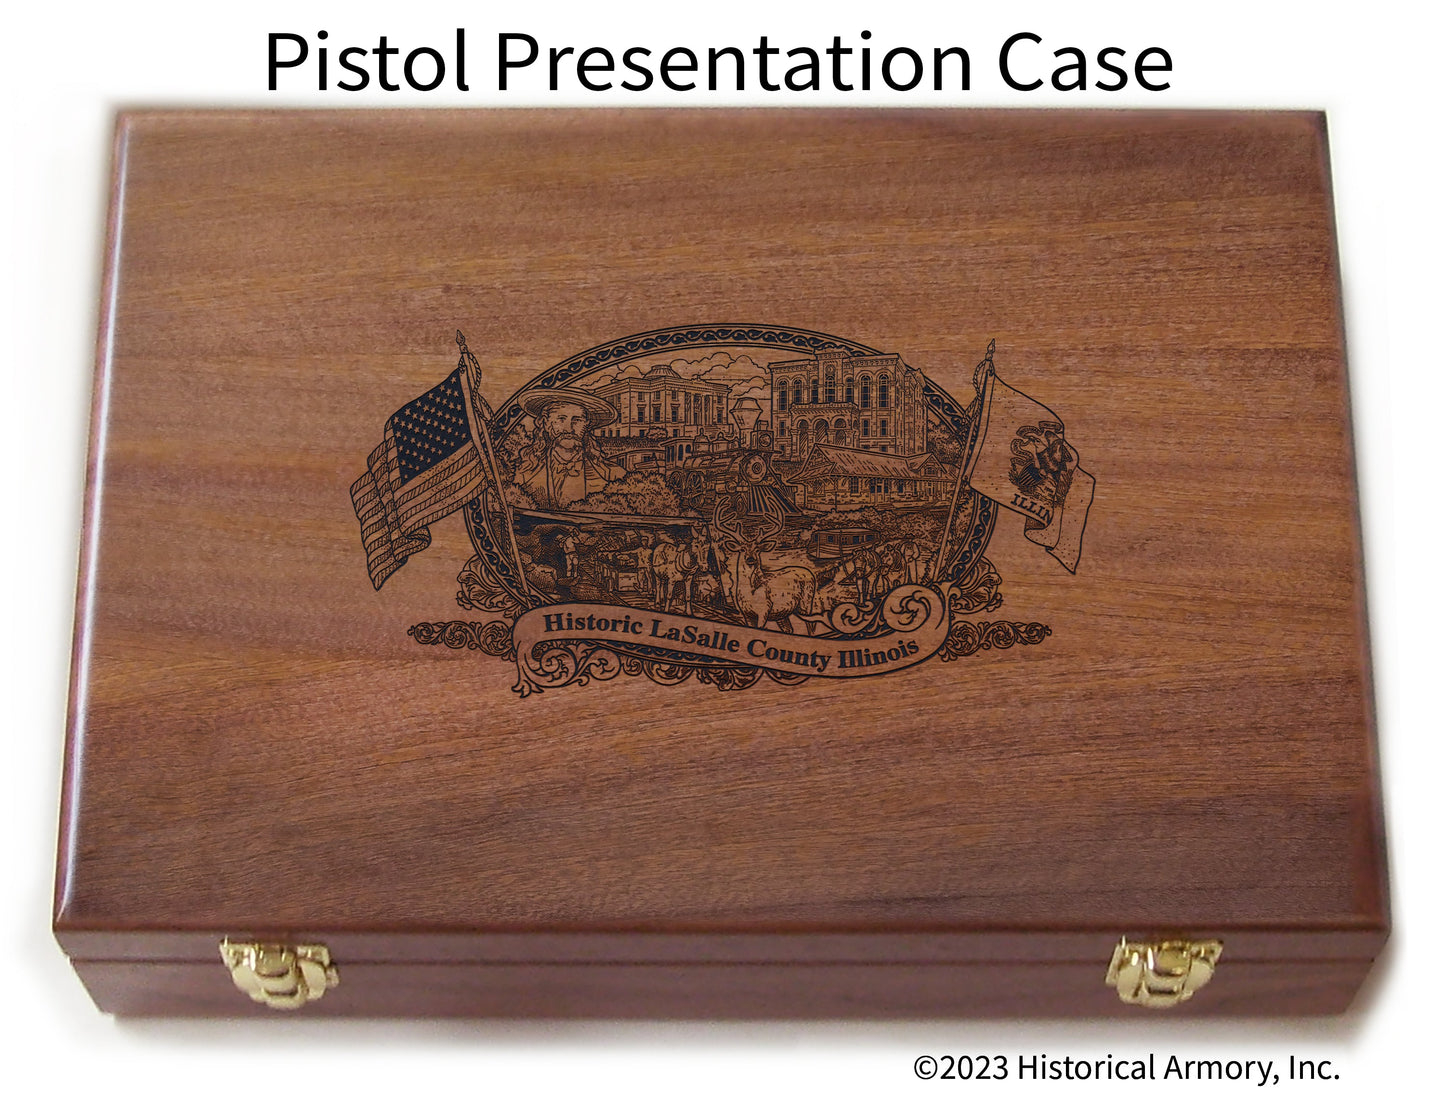 LaSalle County Illinois Engraved .45 Auto Ruger 1911 Presentation Case